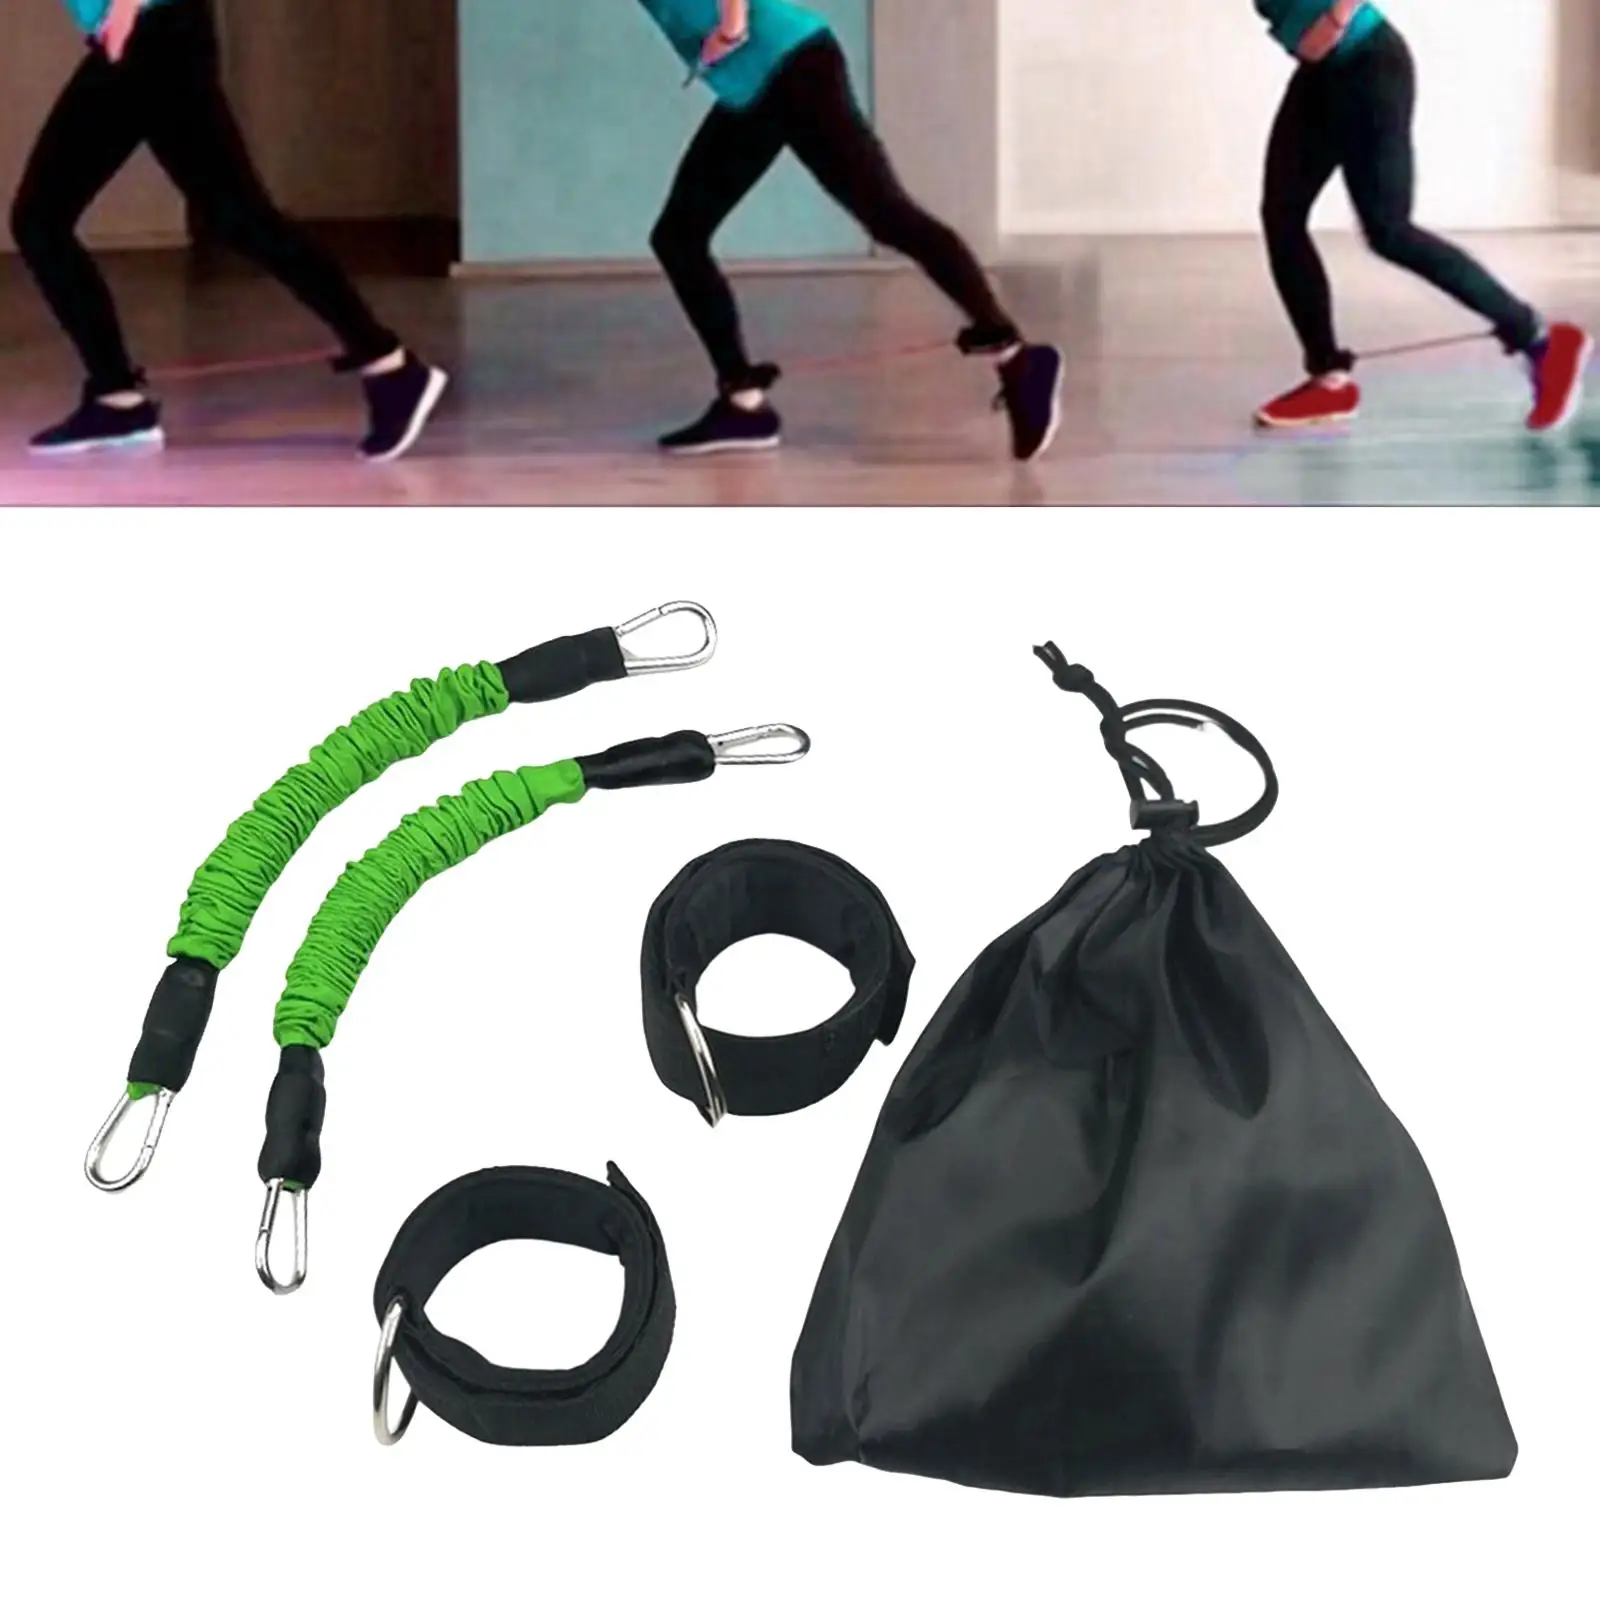 Portable Resistance Bands Strength Training for Exercise Gym Holiday Gifts